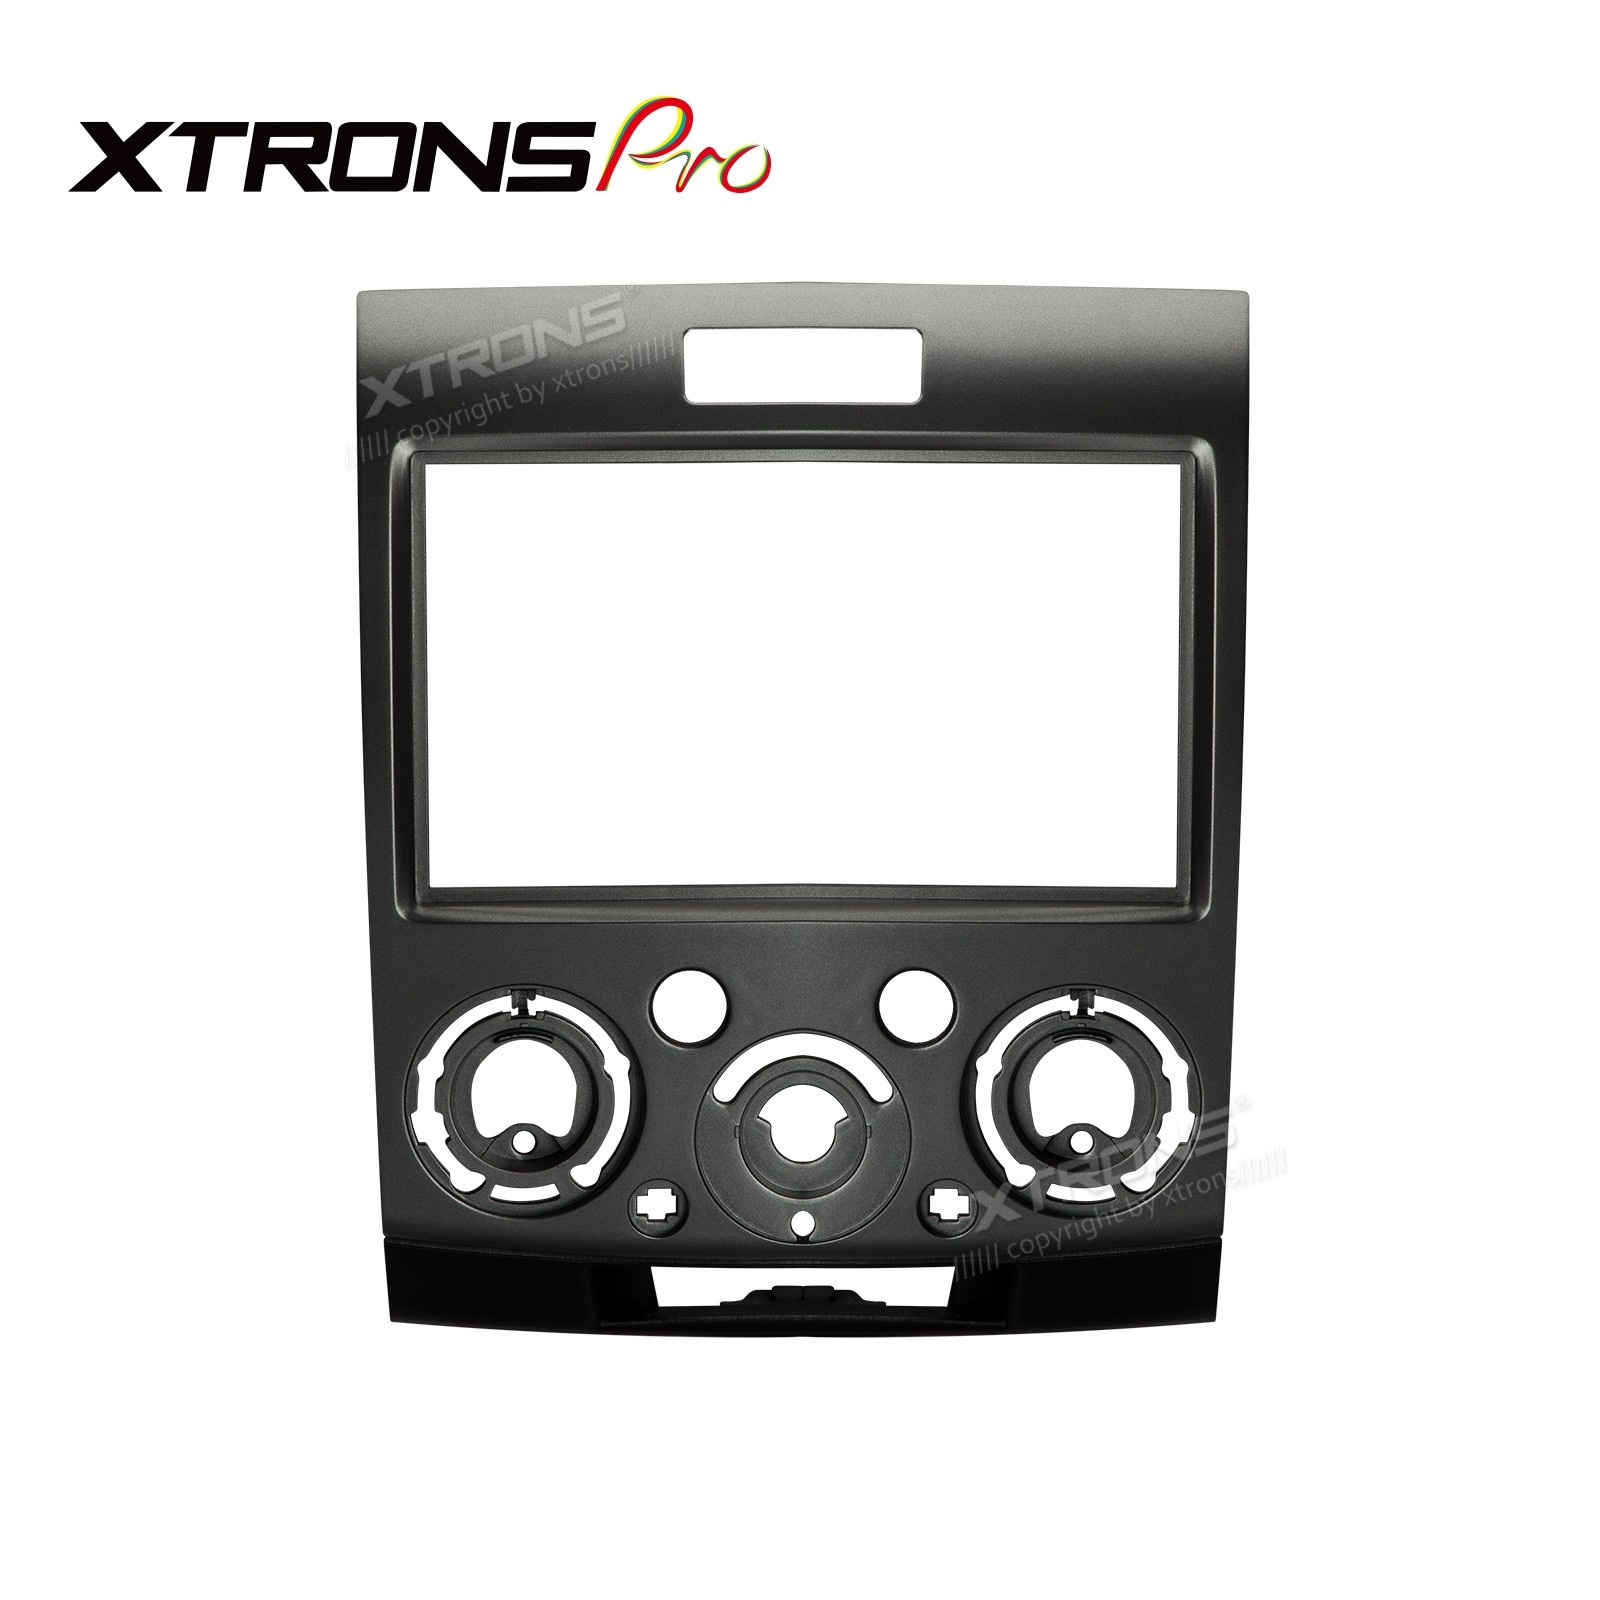 FORD Ranger 2006-2011, Everest 2006-2013 / MAZDA BT-50 2006-2011 2-DIN Car Stereo  Din Facia Panel Fitting Surround XTRONS PRO 11-275